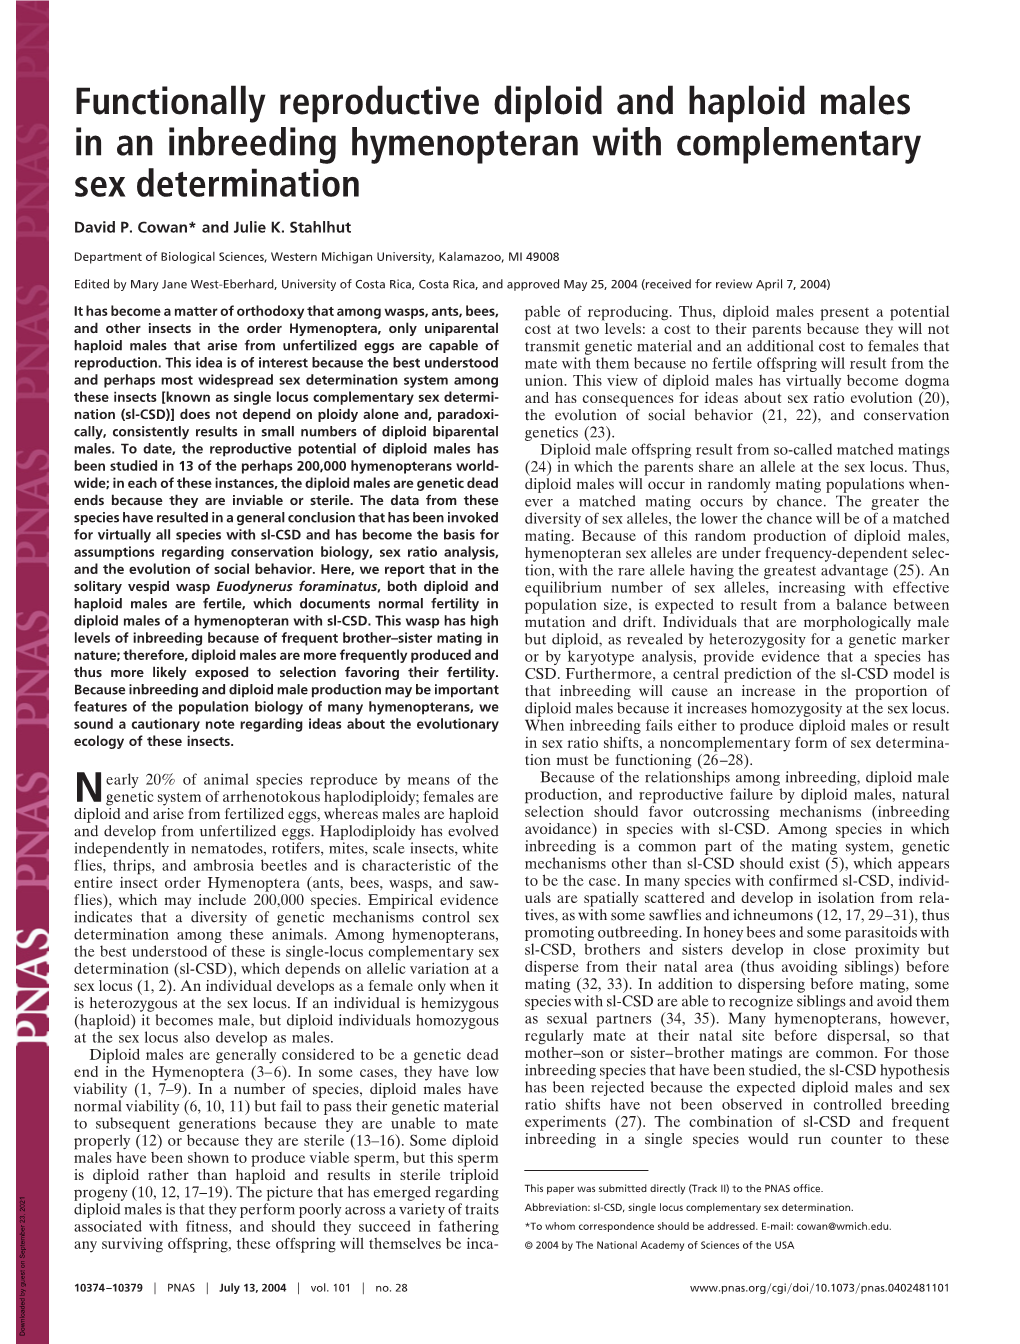 Functionally Reproductive Diploid and Haploid Males in an Inbreeding Hymenopteran with Complementary Sex Determination